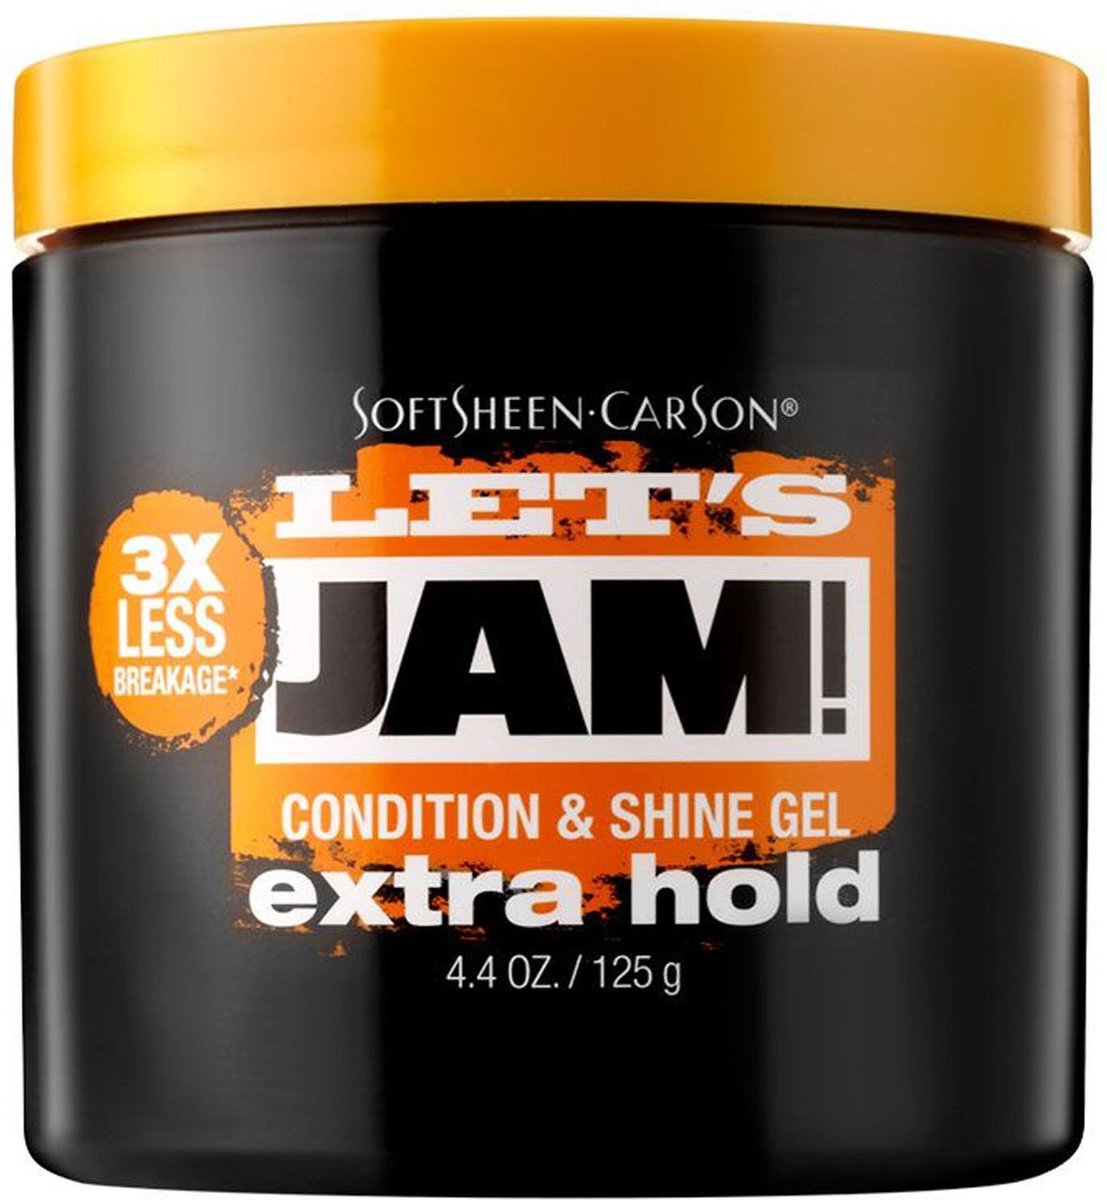 Let's Jam Shining & Conditioning Gel Extra Hold